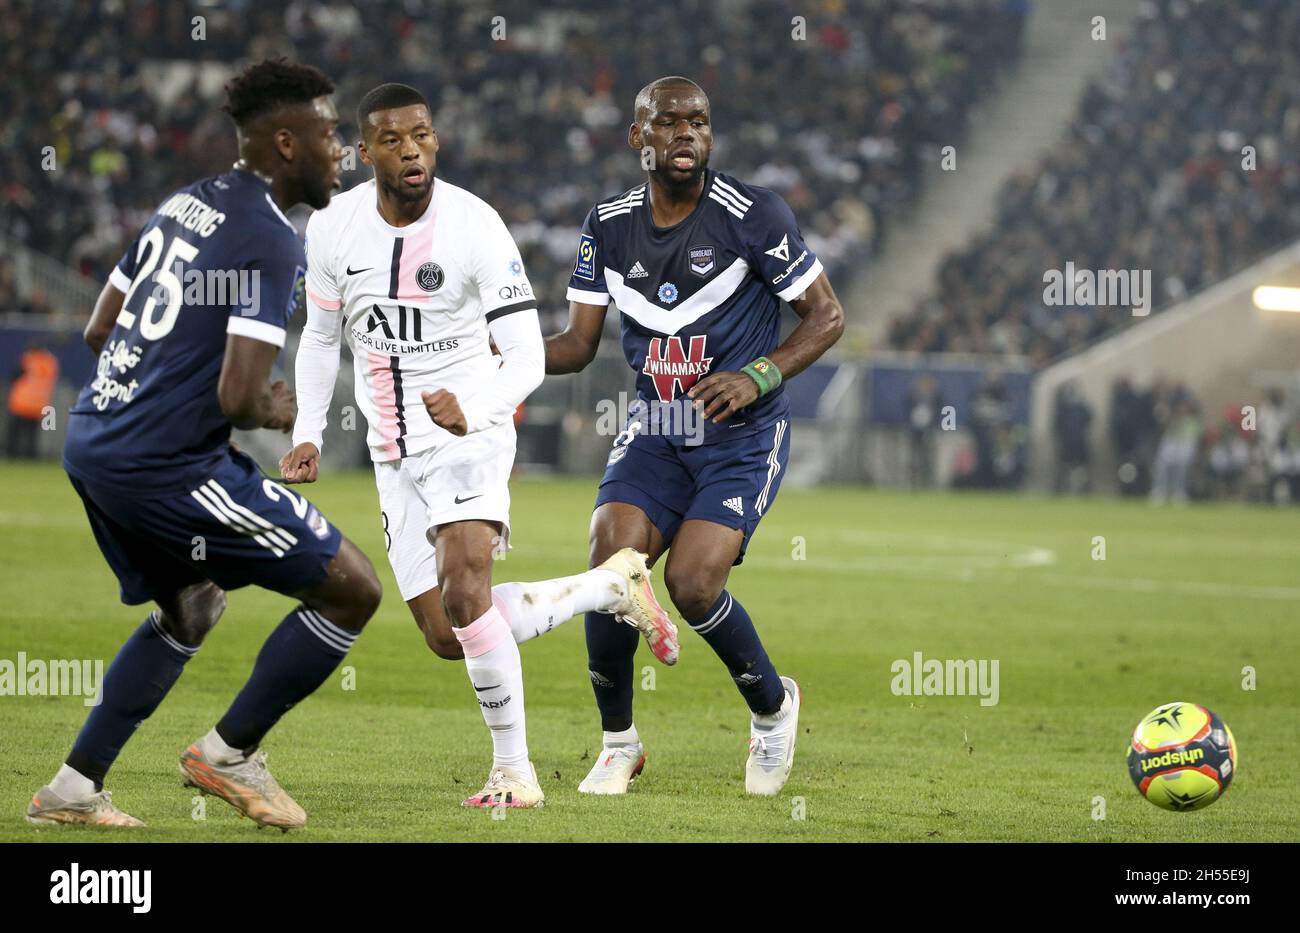 Psg bordeaux match hi-res stock photography and images - Alamy